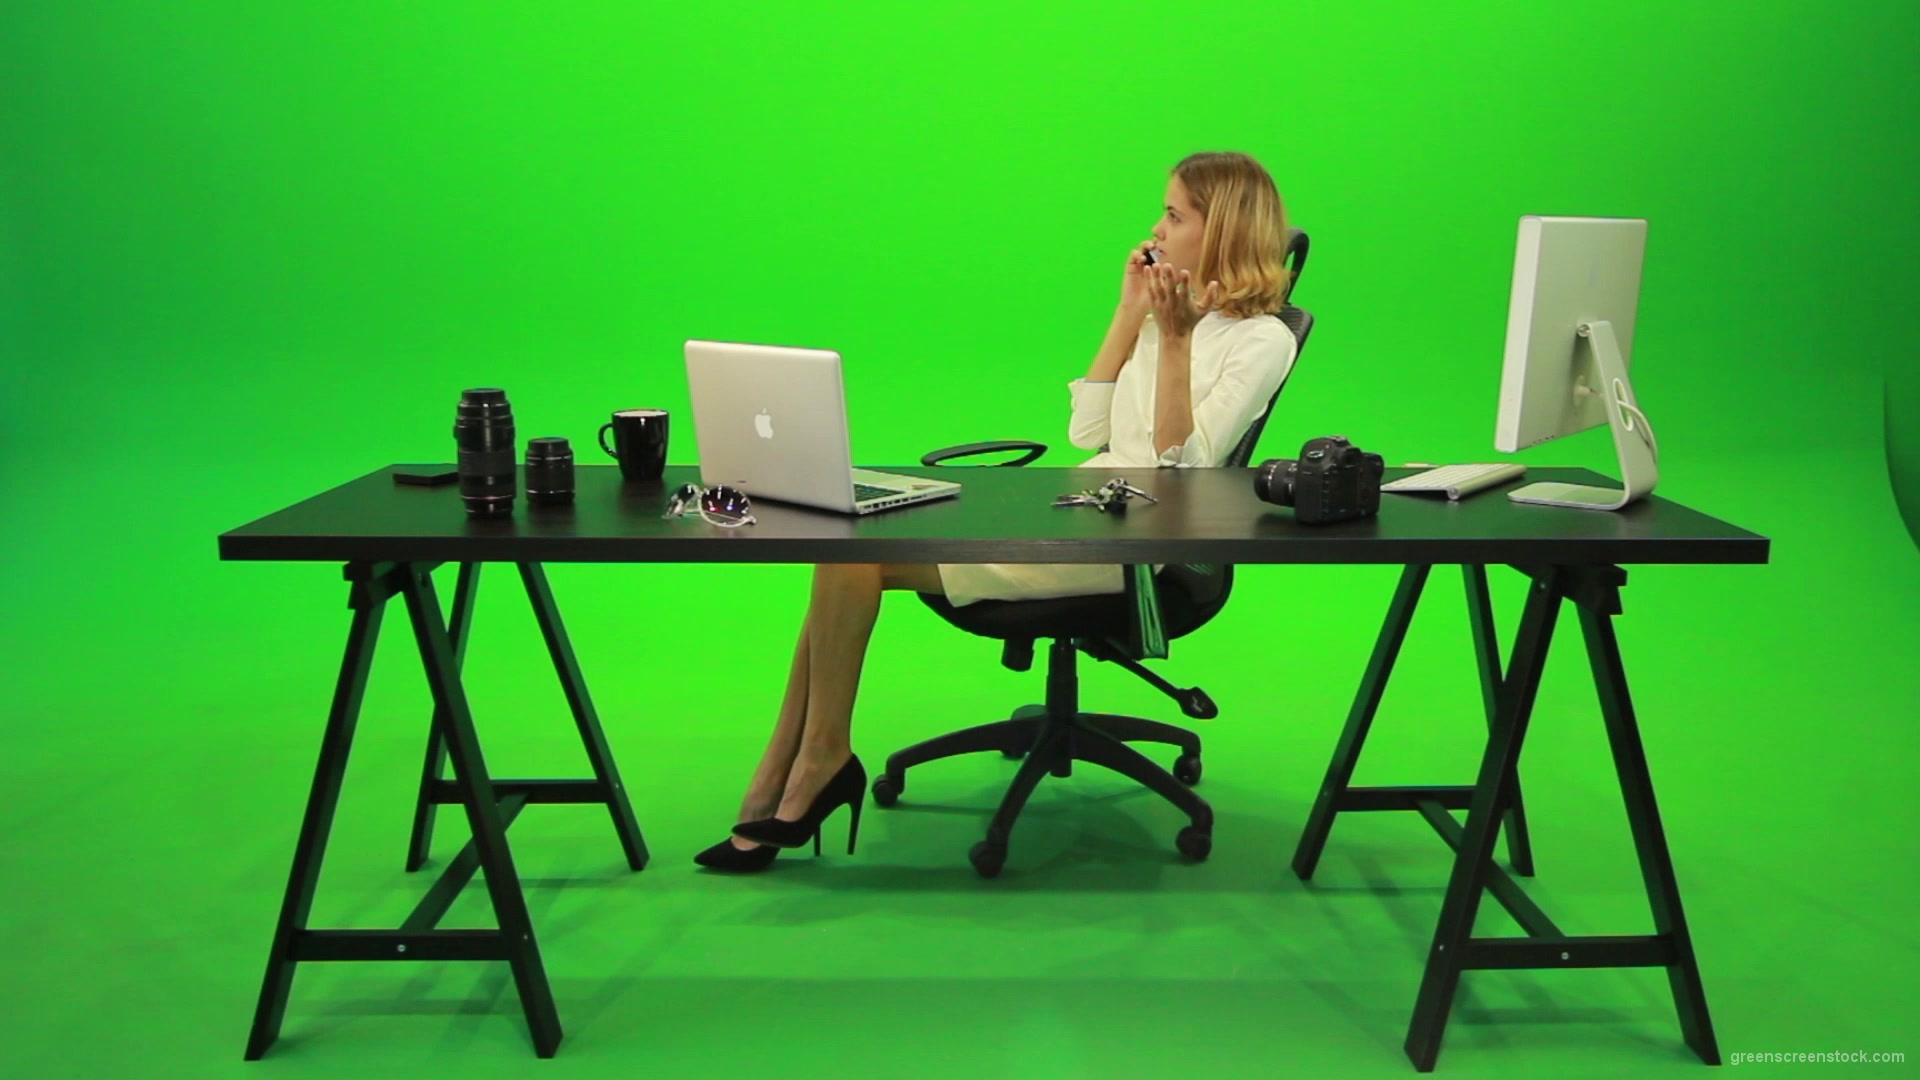 Angry-Business-Woman-Talking-on-the-Phone-Green-Screen-Footage_004 Green Screen Stock